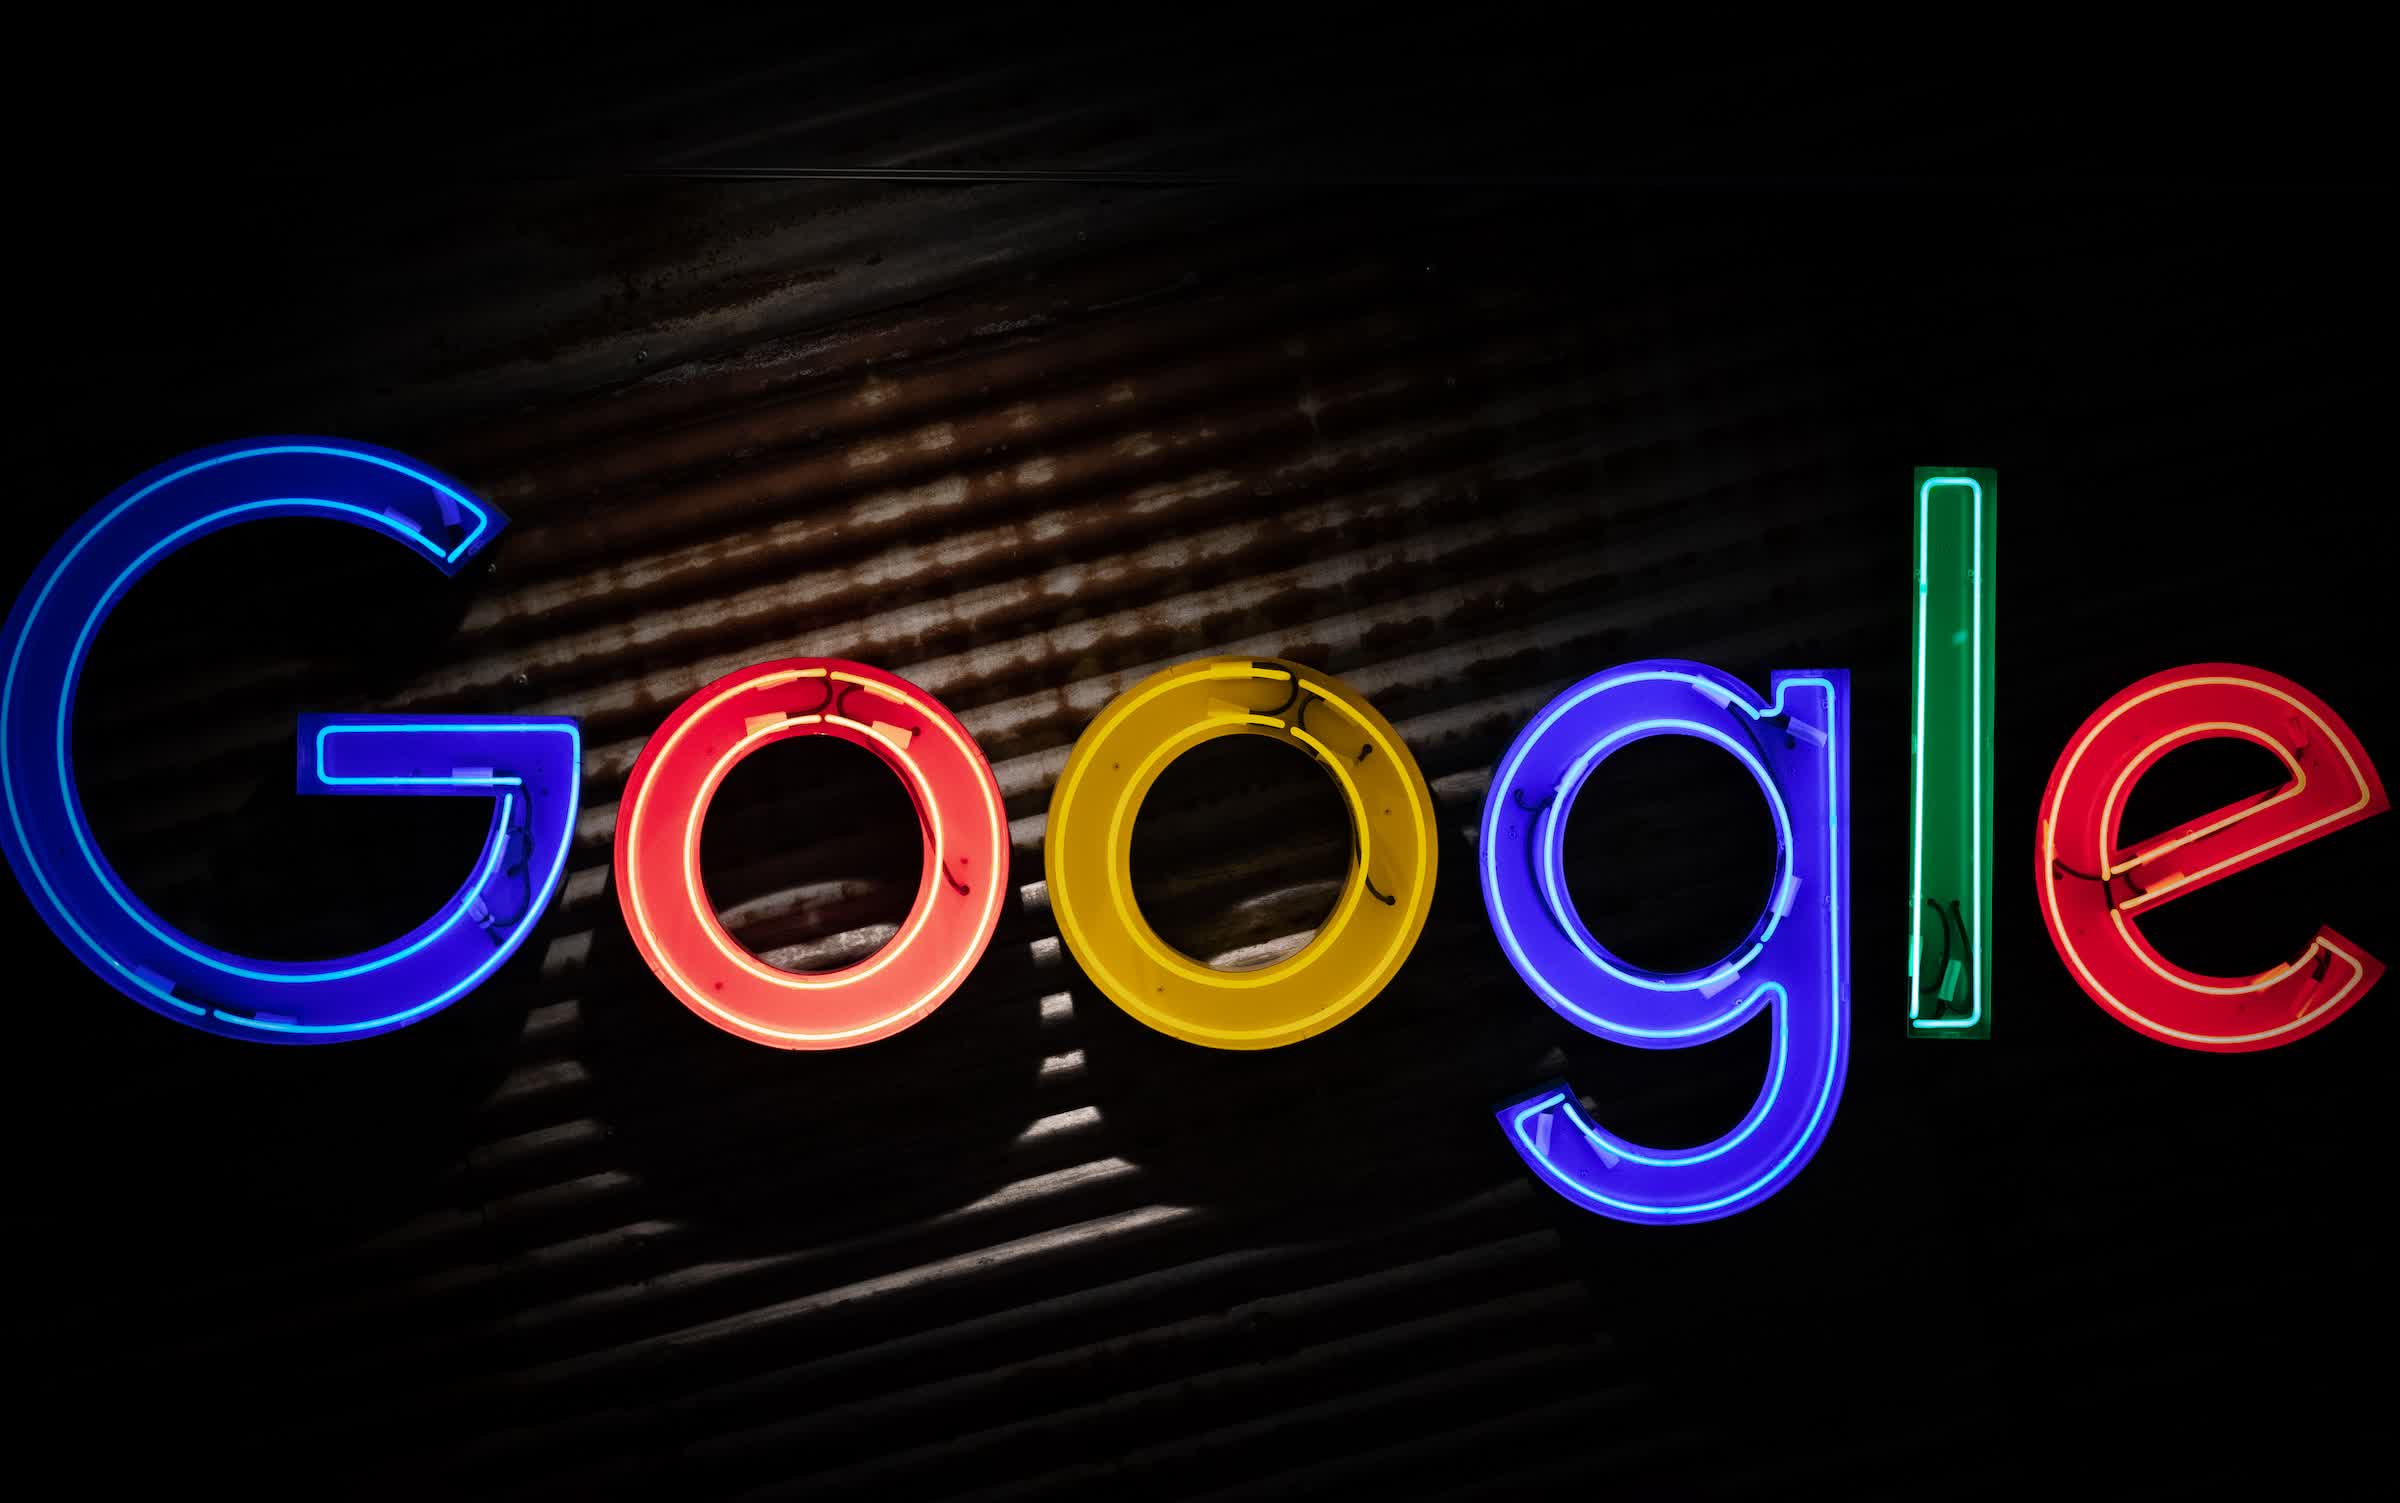 Google says it will start deleting inactive accounts later this year